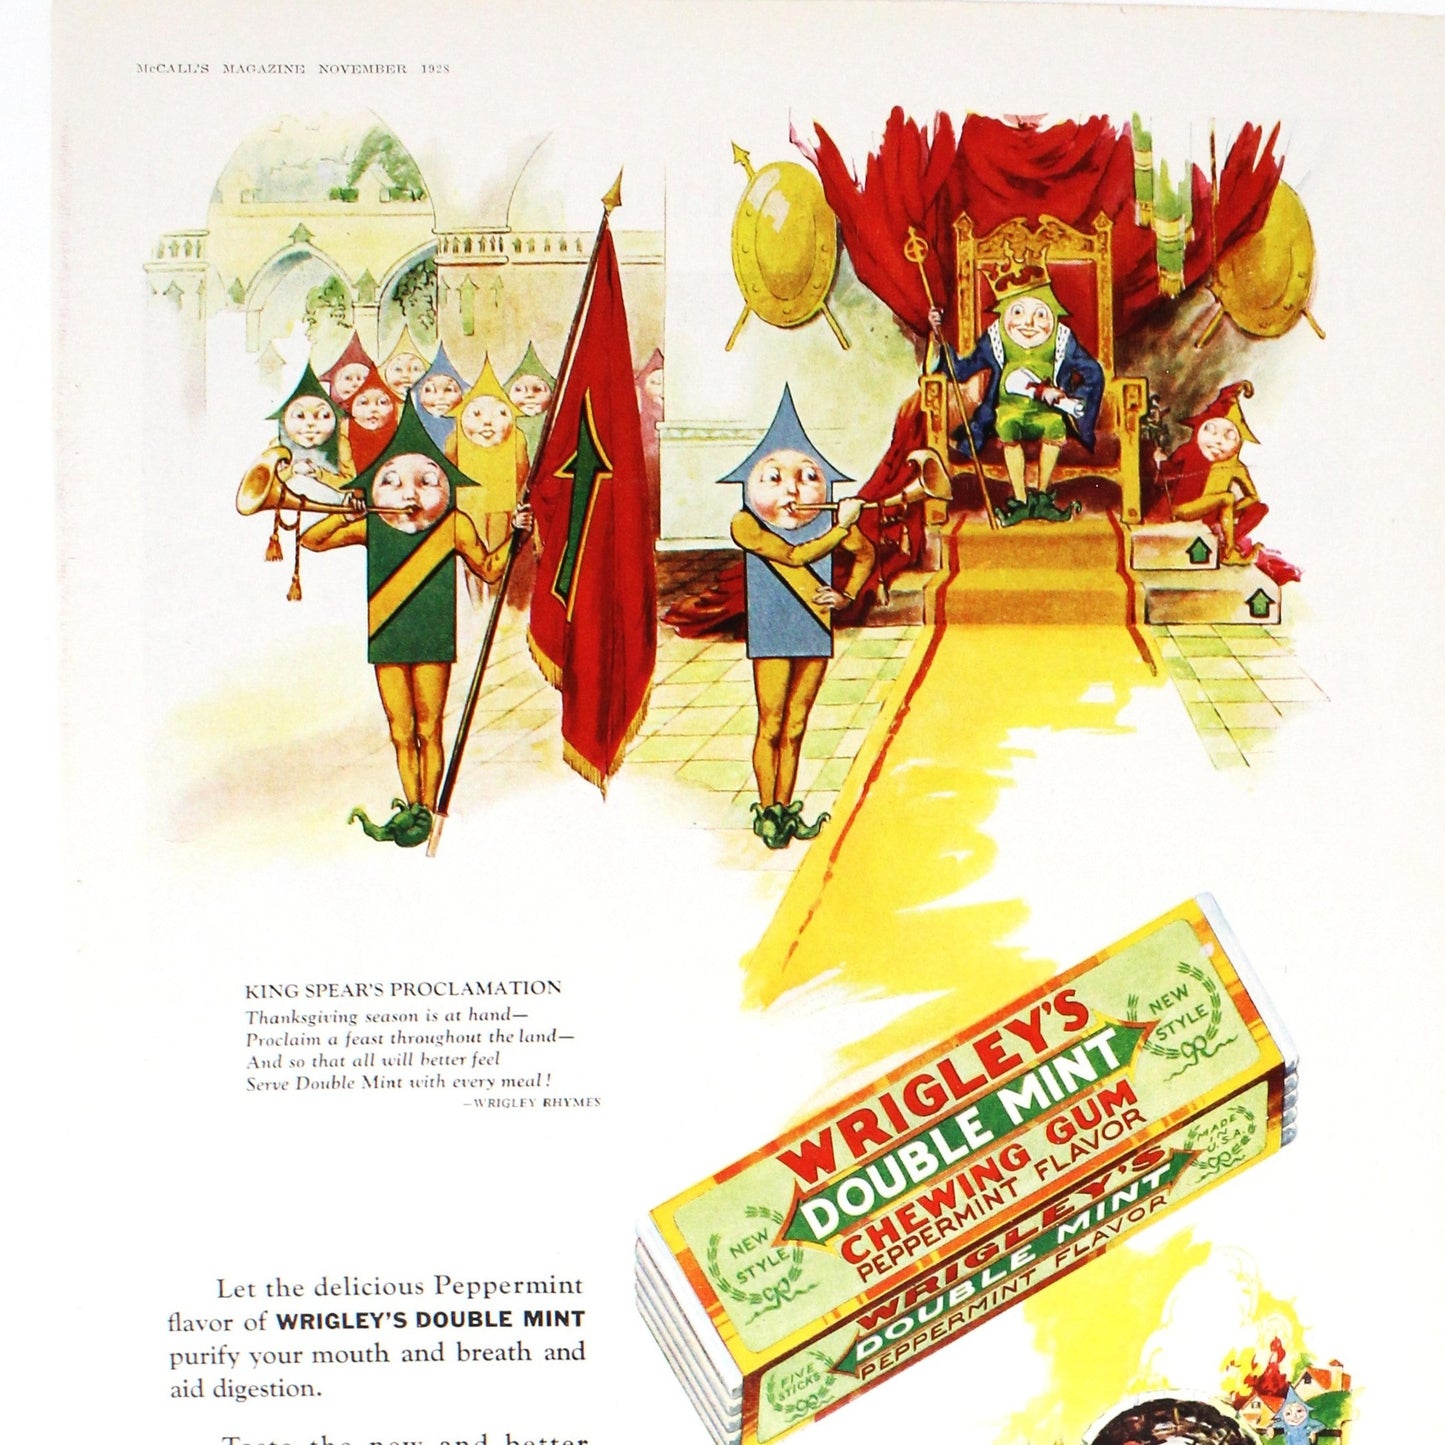 Advertisement, Wrigley's Chewing Gum, Original 1928 Magazine Ad, King Spear, Vintage McCall's